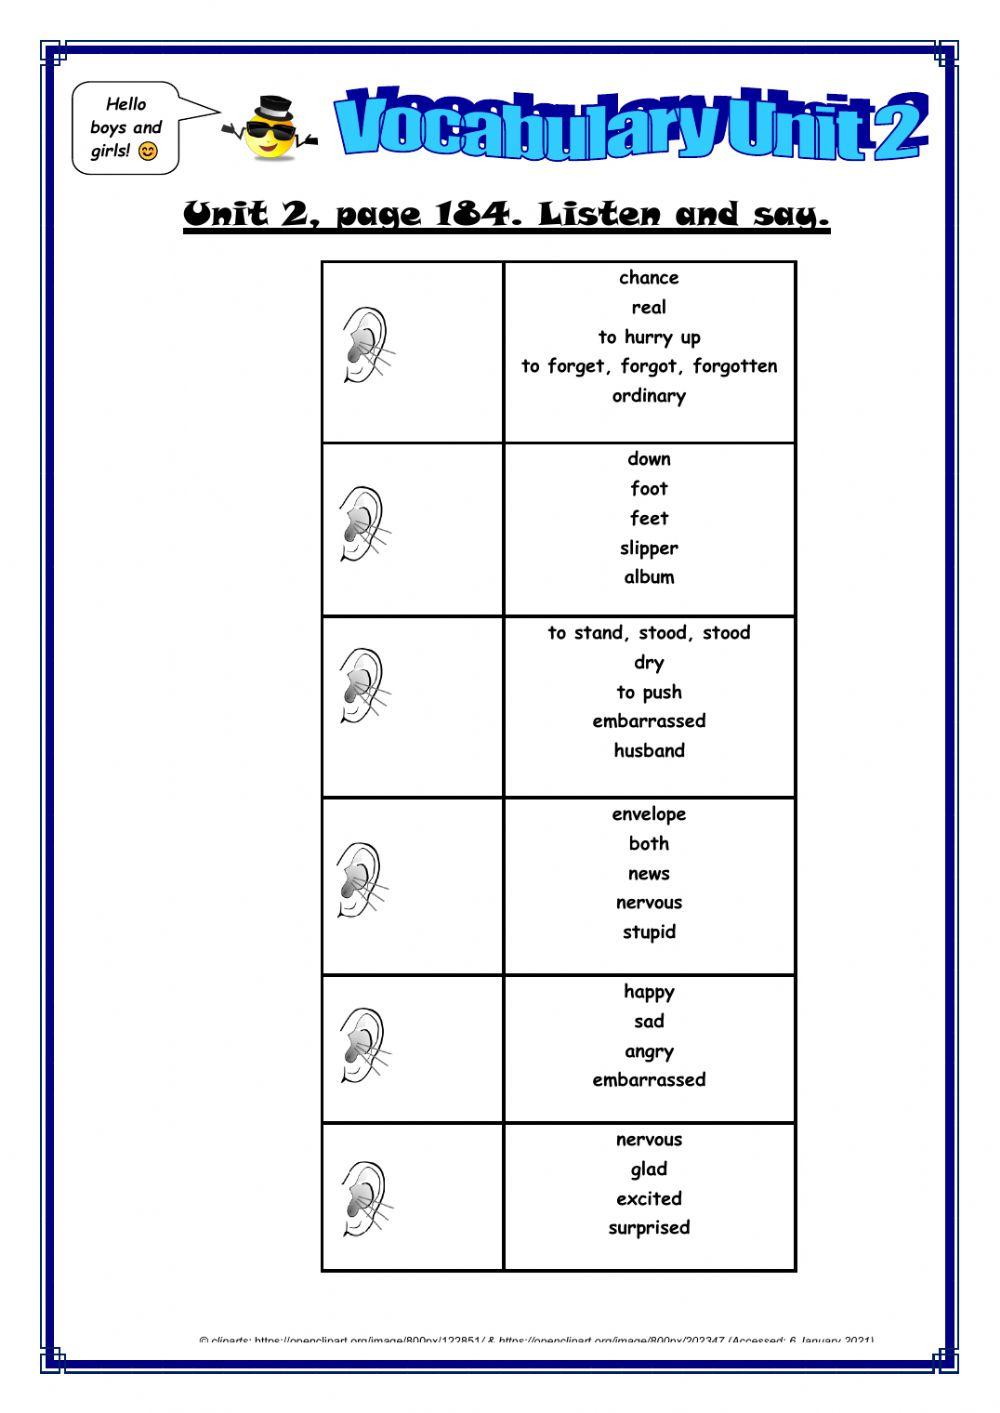 Speaking & vocabulary exercise (page 184)